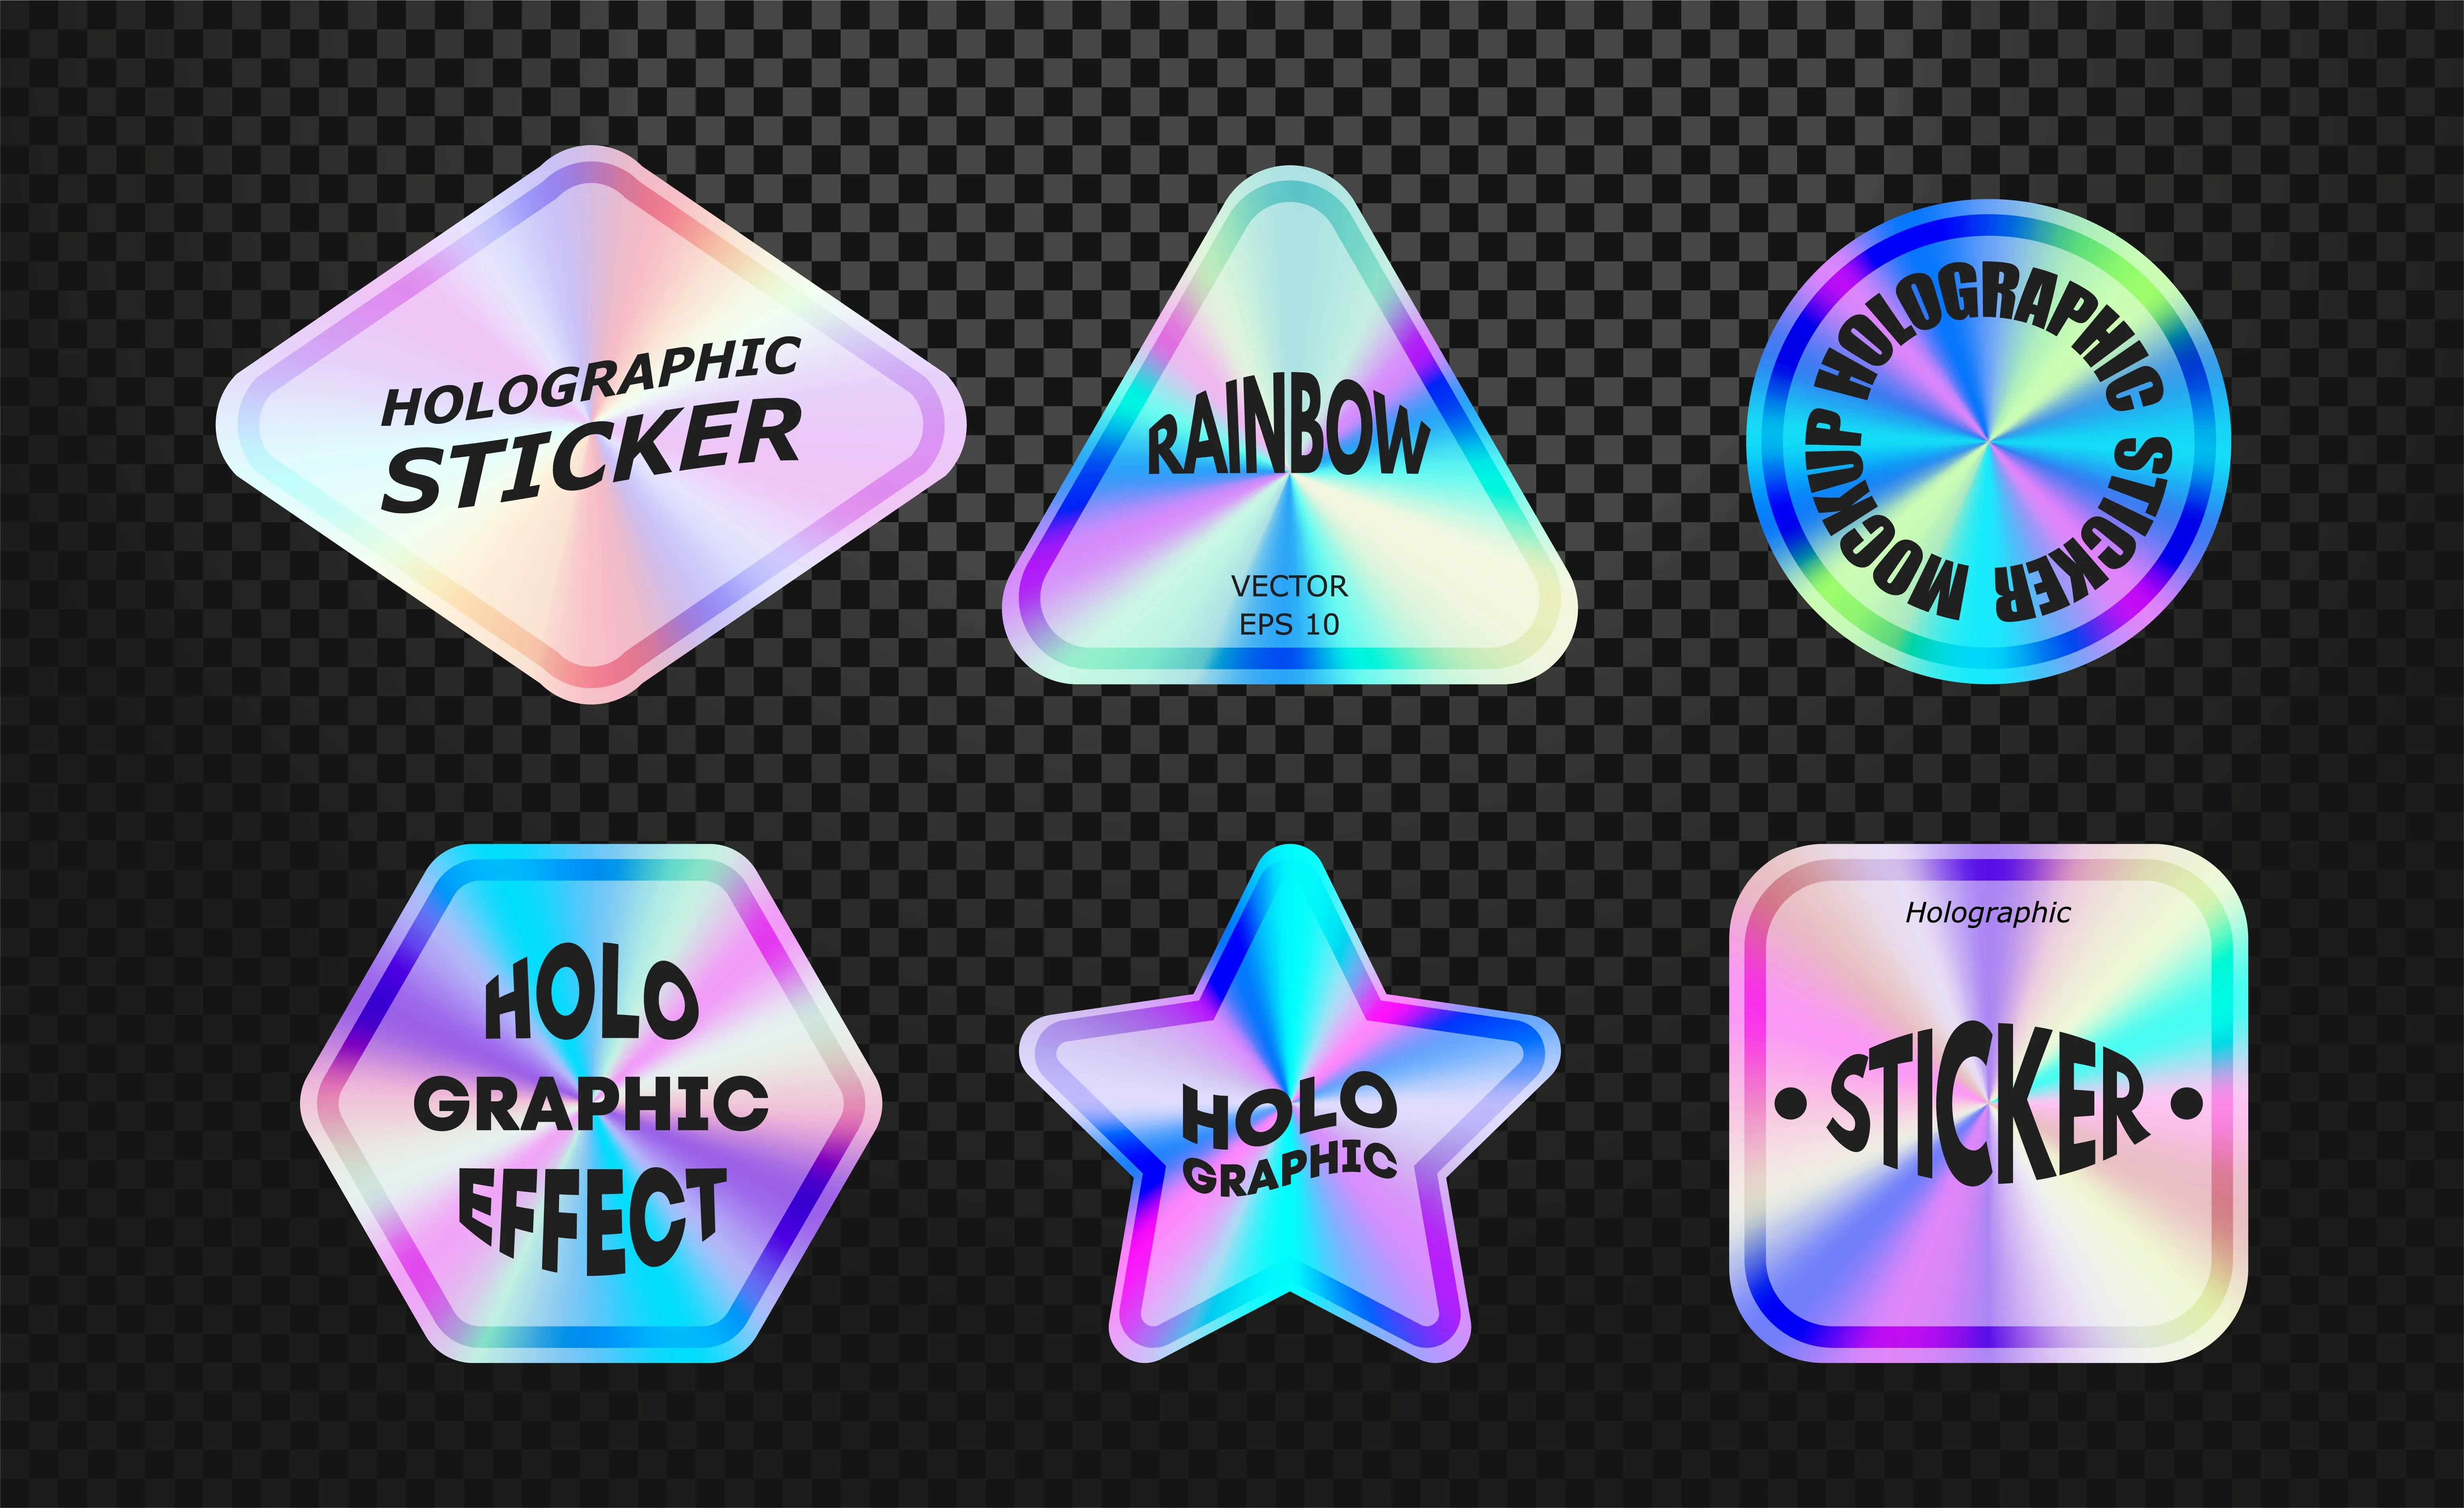 Holographic sticker set in different shapes